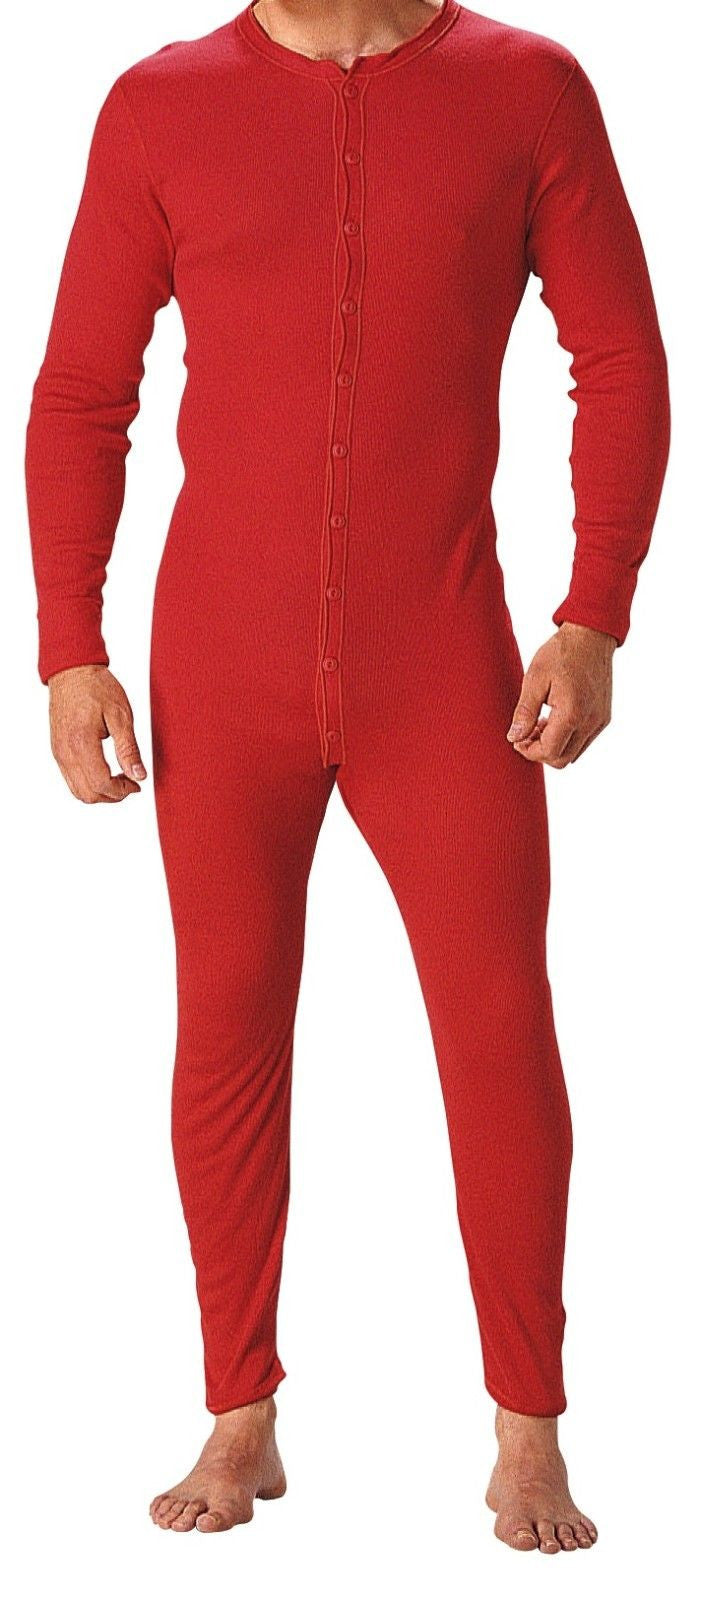 The Original Red Union Suit 100% Cotton One Piece Coverall / Long John Underwear